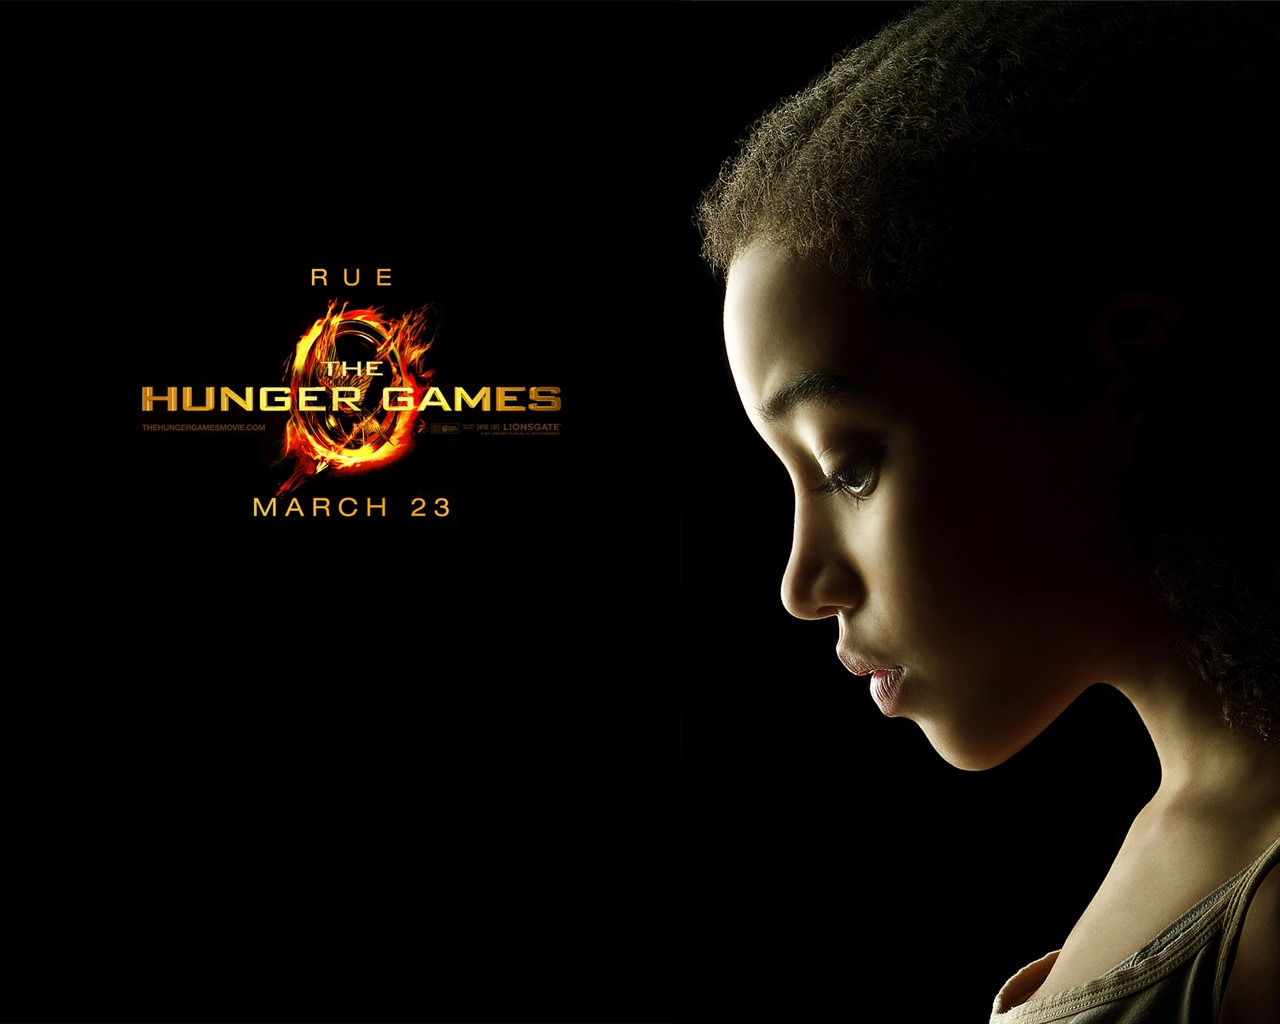 The Hunger Games Rue for 1280 x 1024 resolution